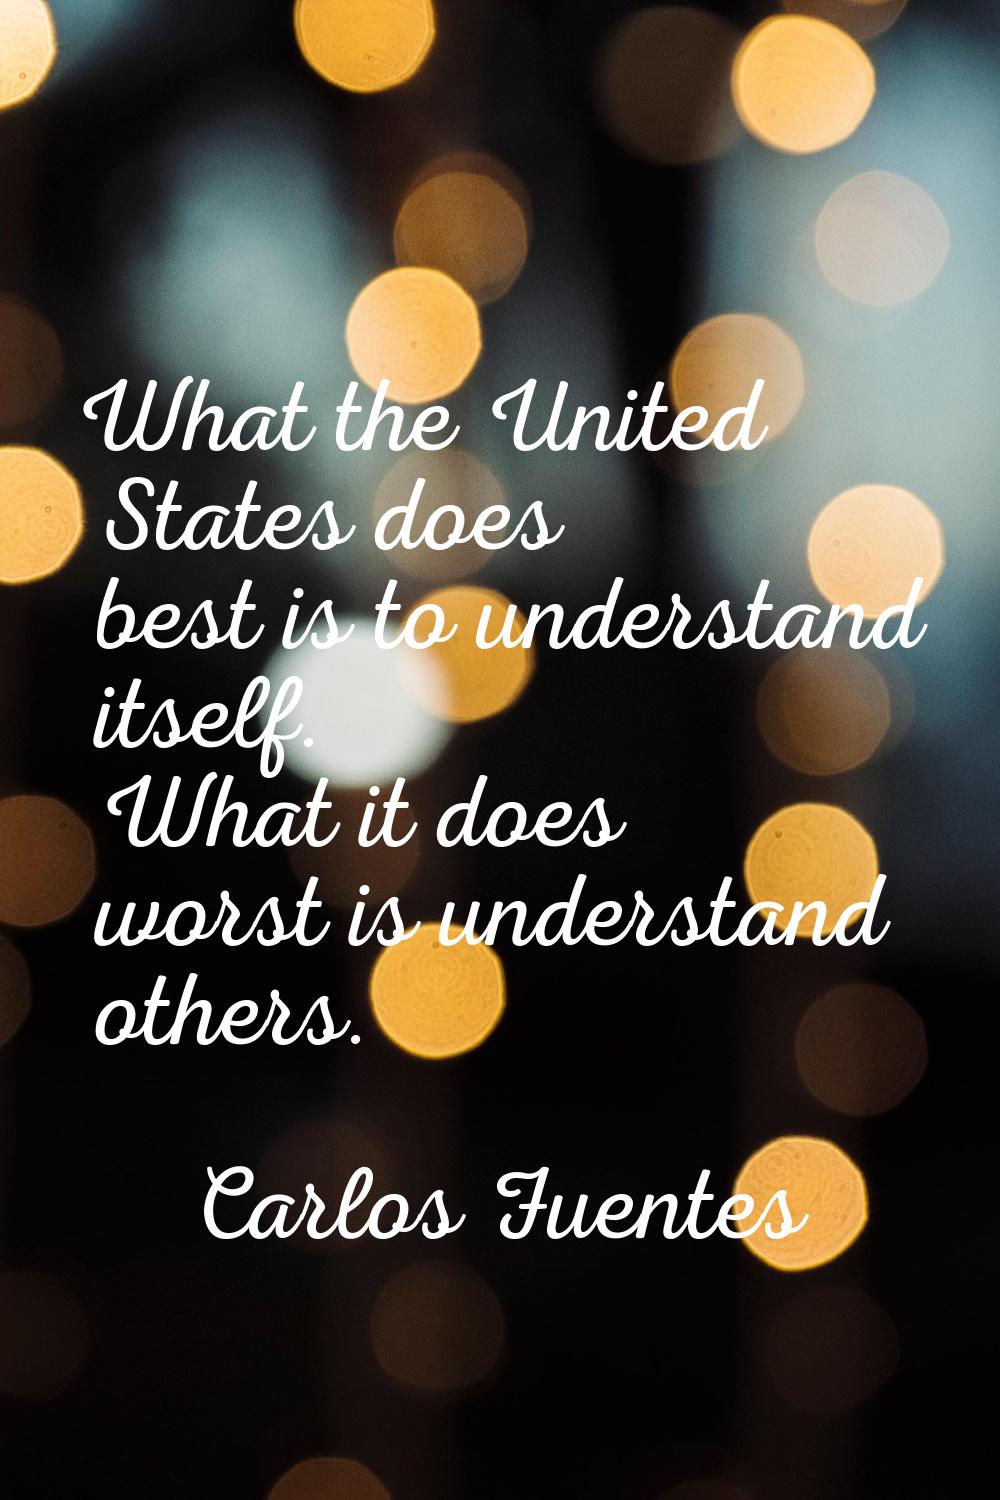 What the United States does best is to understand itself. What it does worst is understand others.